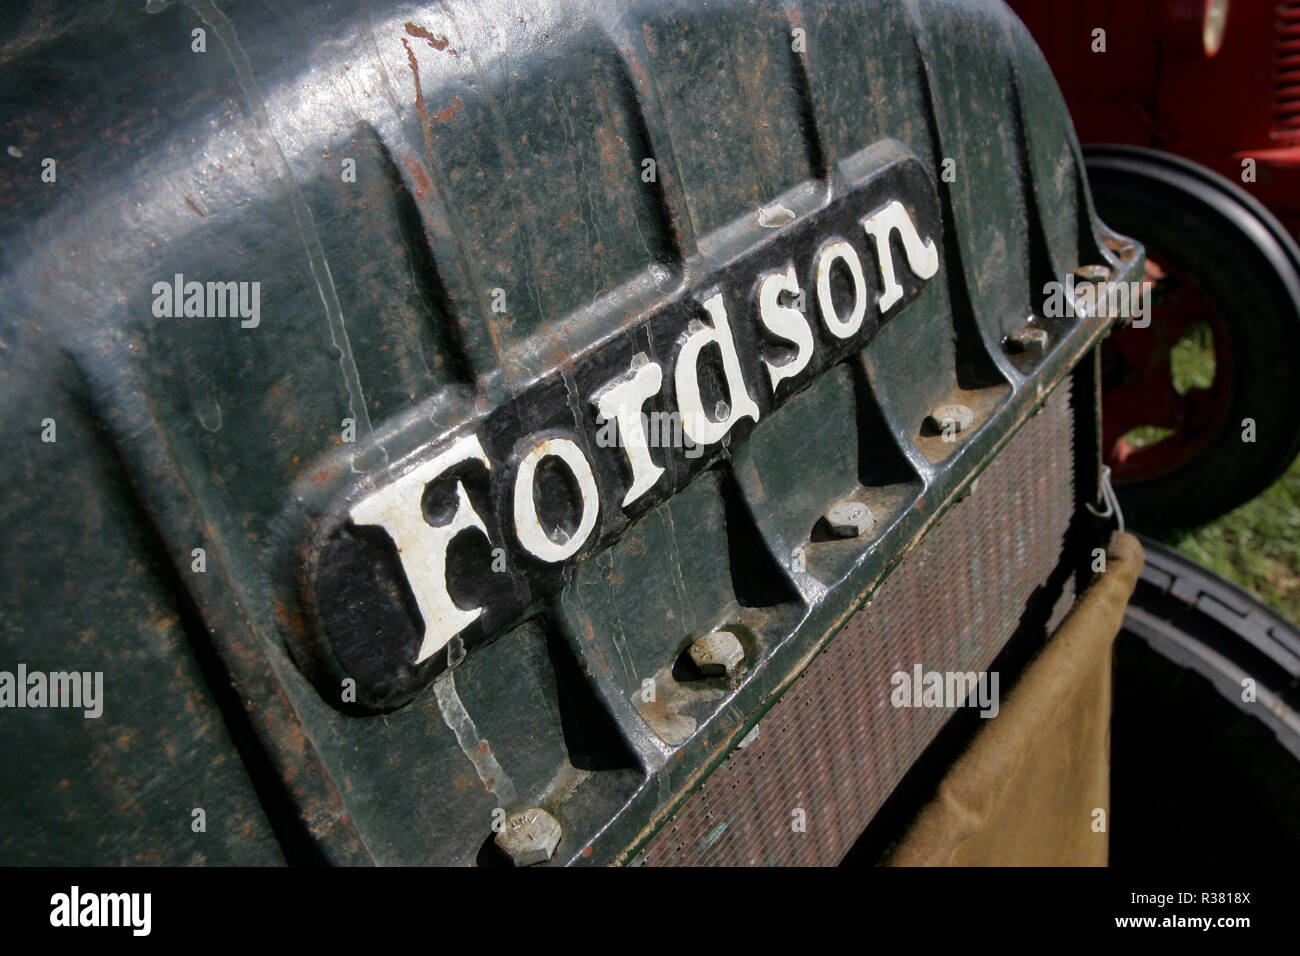 Fordson tractor and emblem on display at a country fair. England UK GB Stock Photo